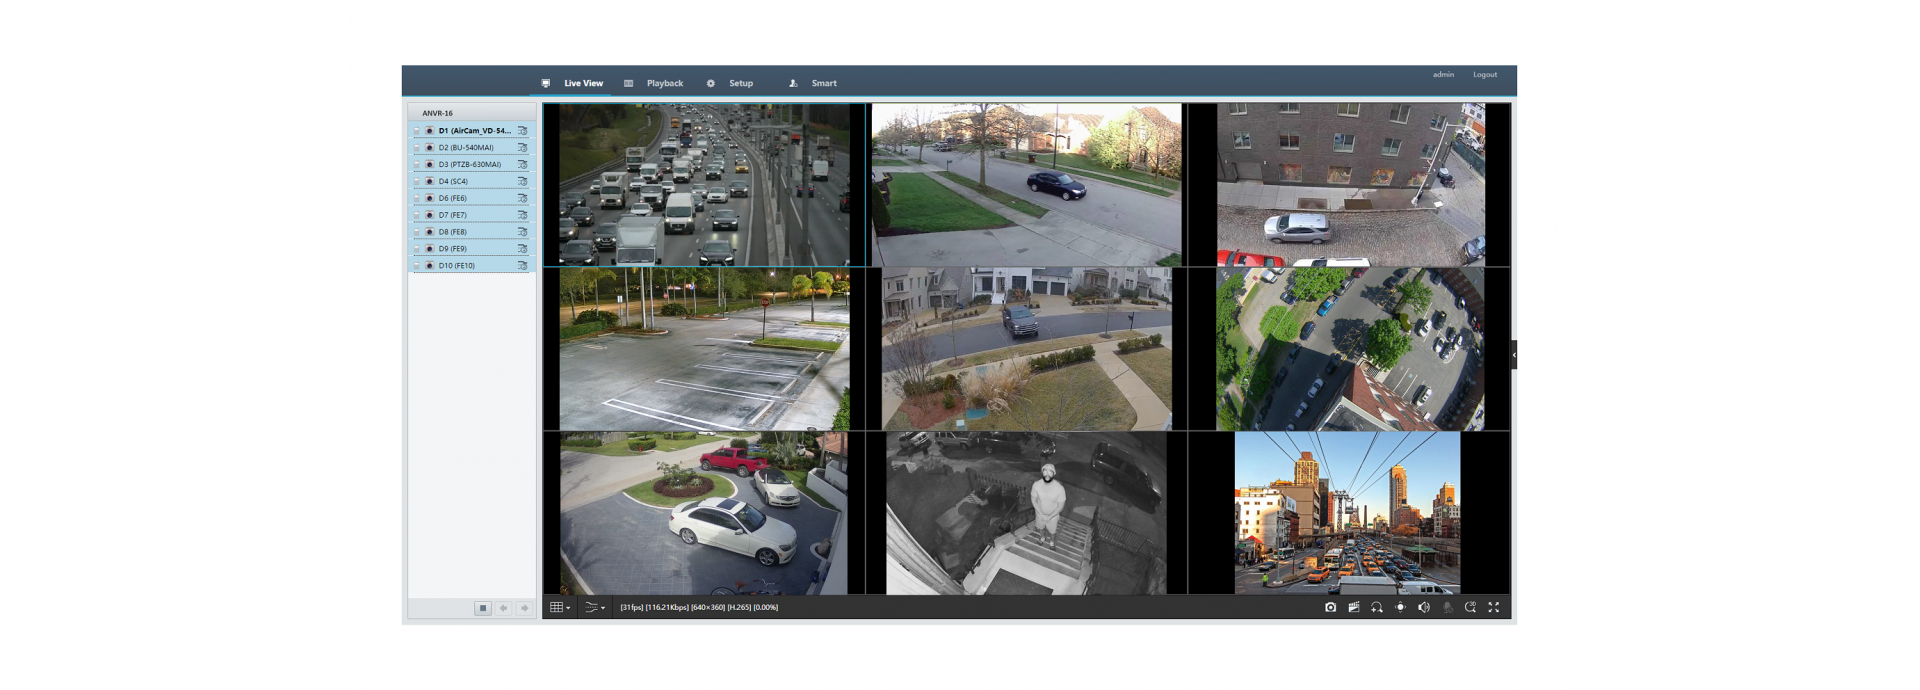 16 Channels IP camera Performing Real-time Remote Monitoring